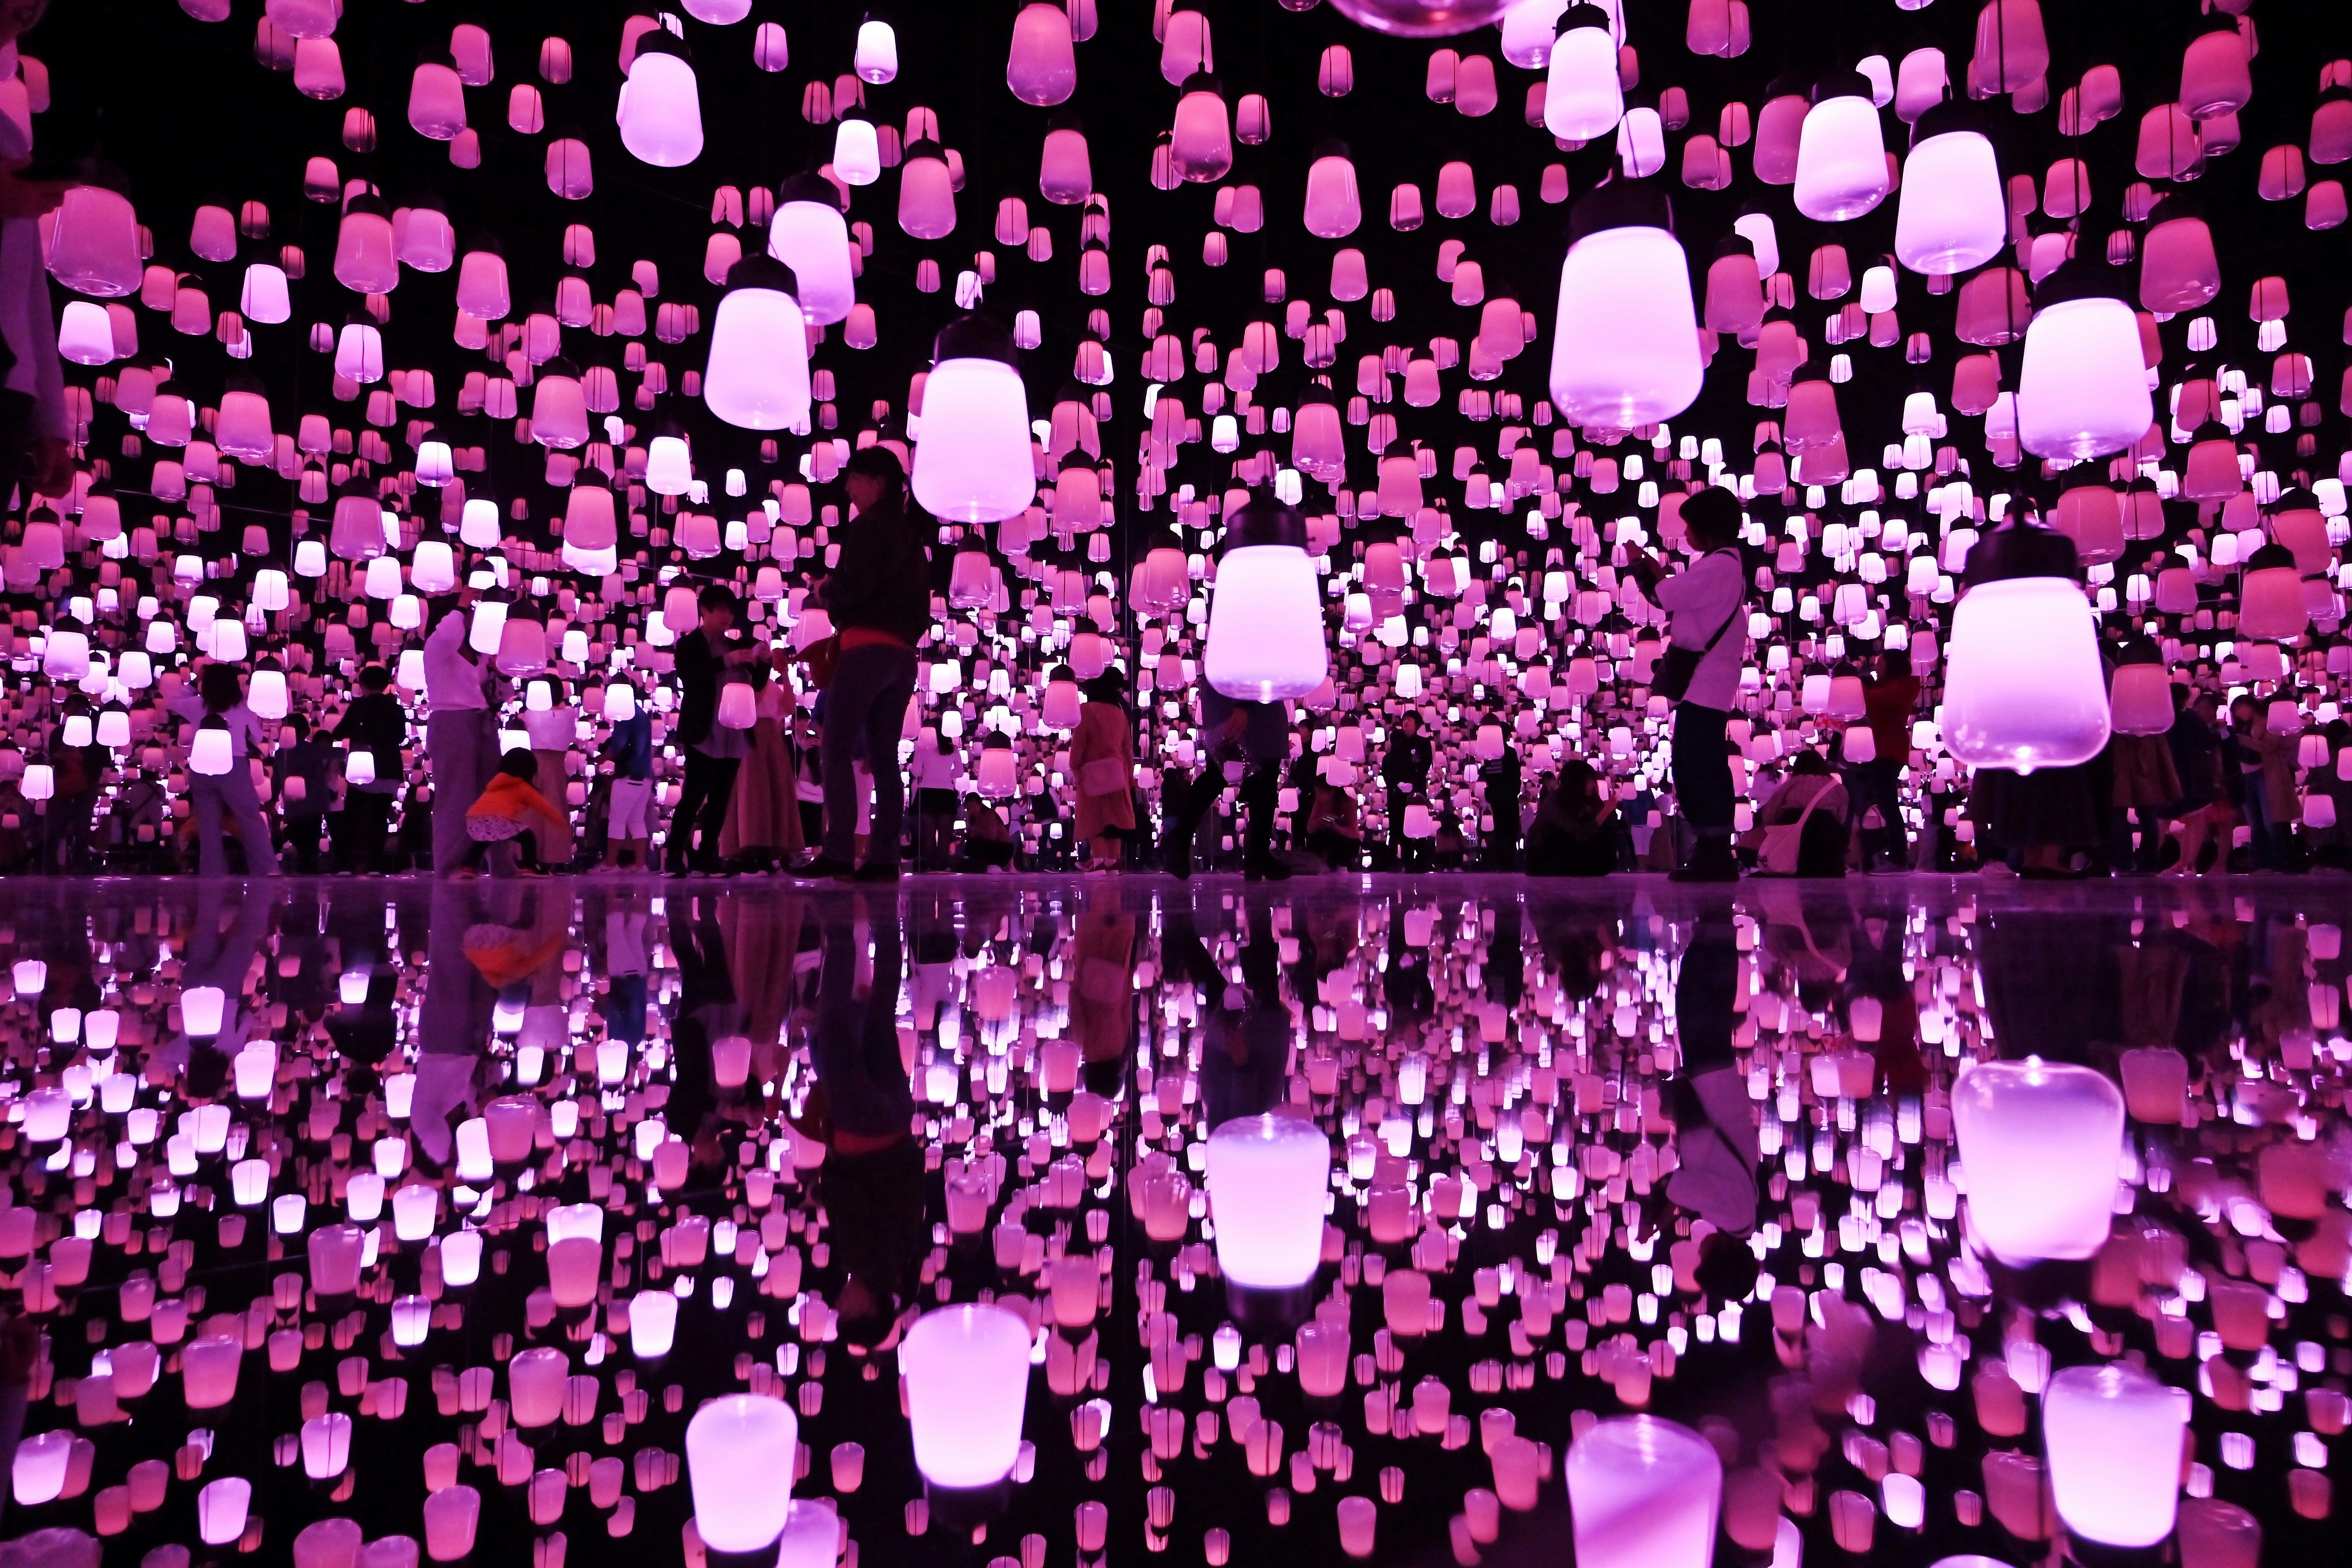 Gallery-goers are visible in silhouette in a large room which is strung with neon-pink lamps, which are reflected prettily in the mirrored floor